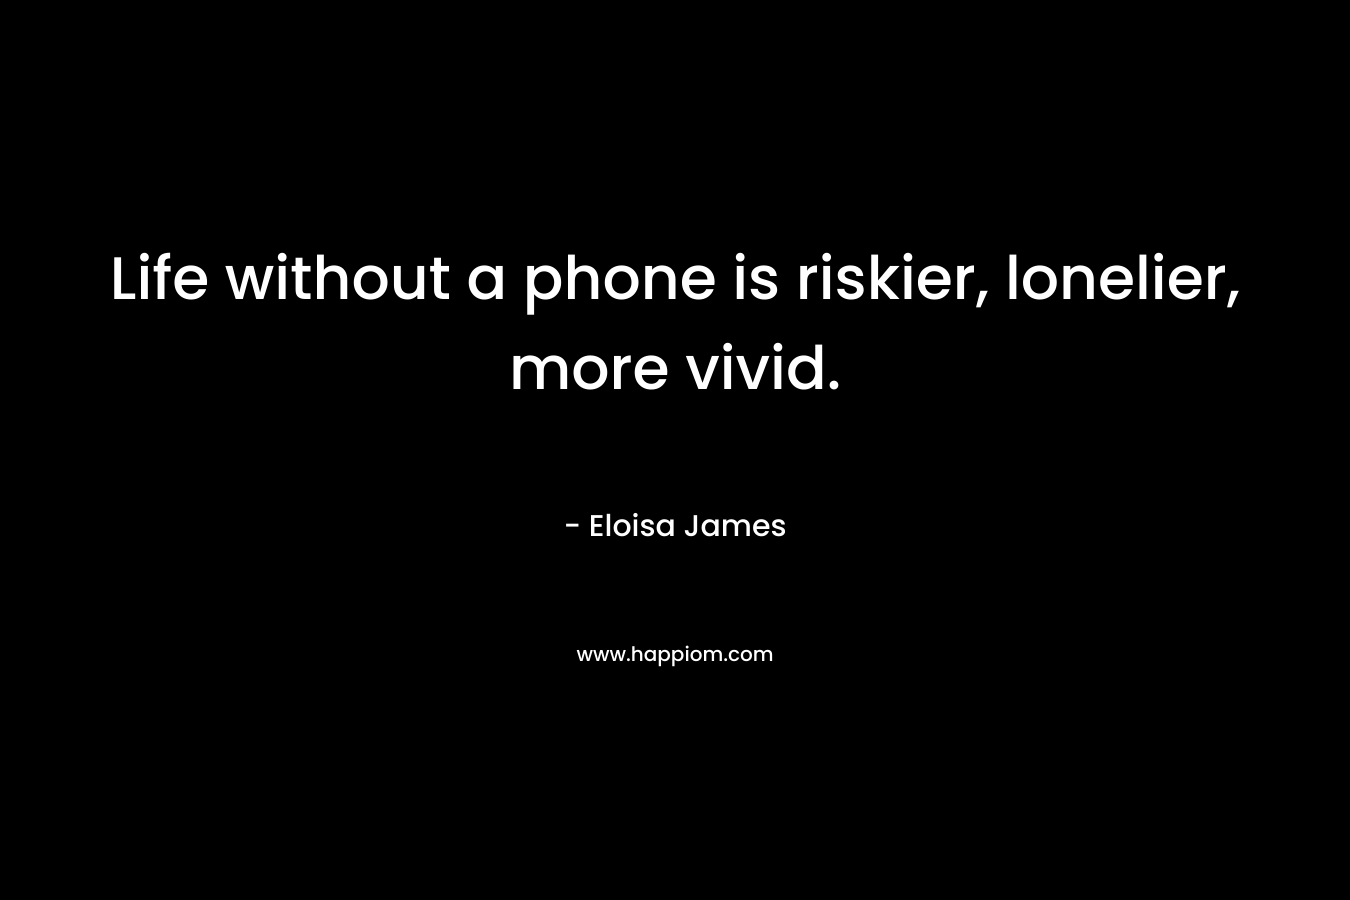 Life without a phone is riskier, lonelier, more vivid. – Eloisa James